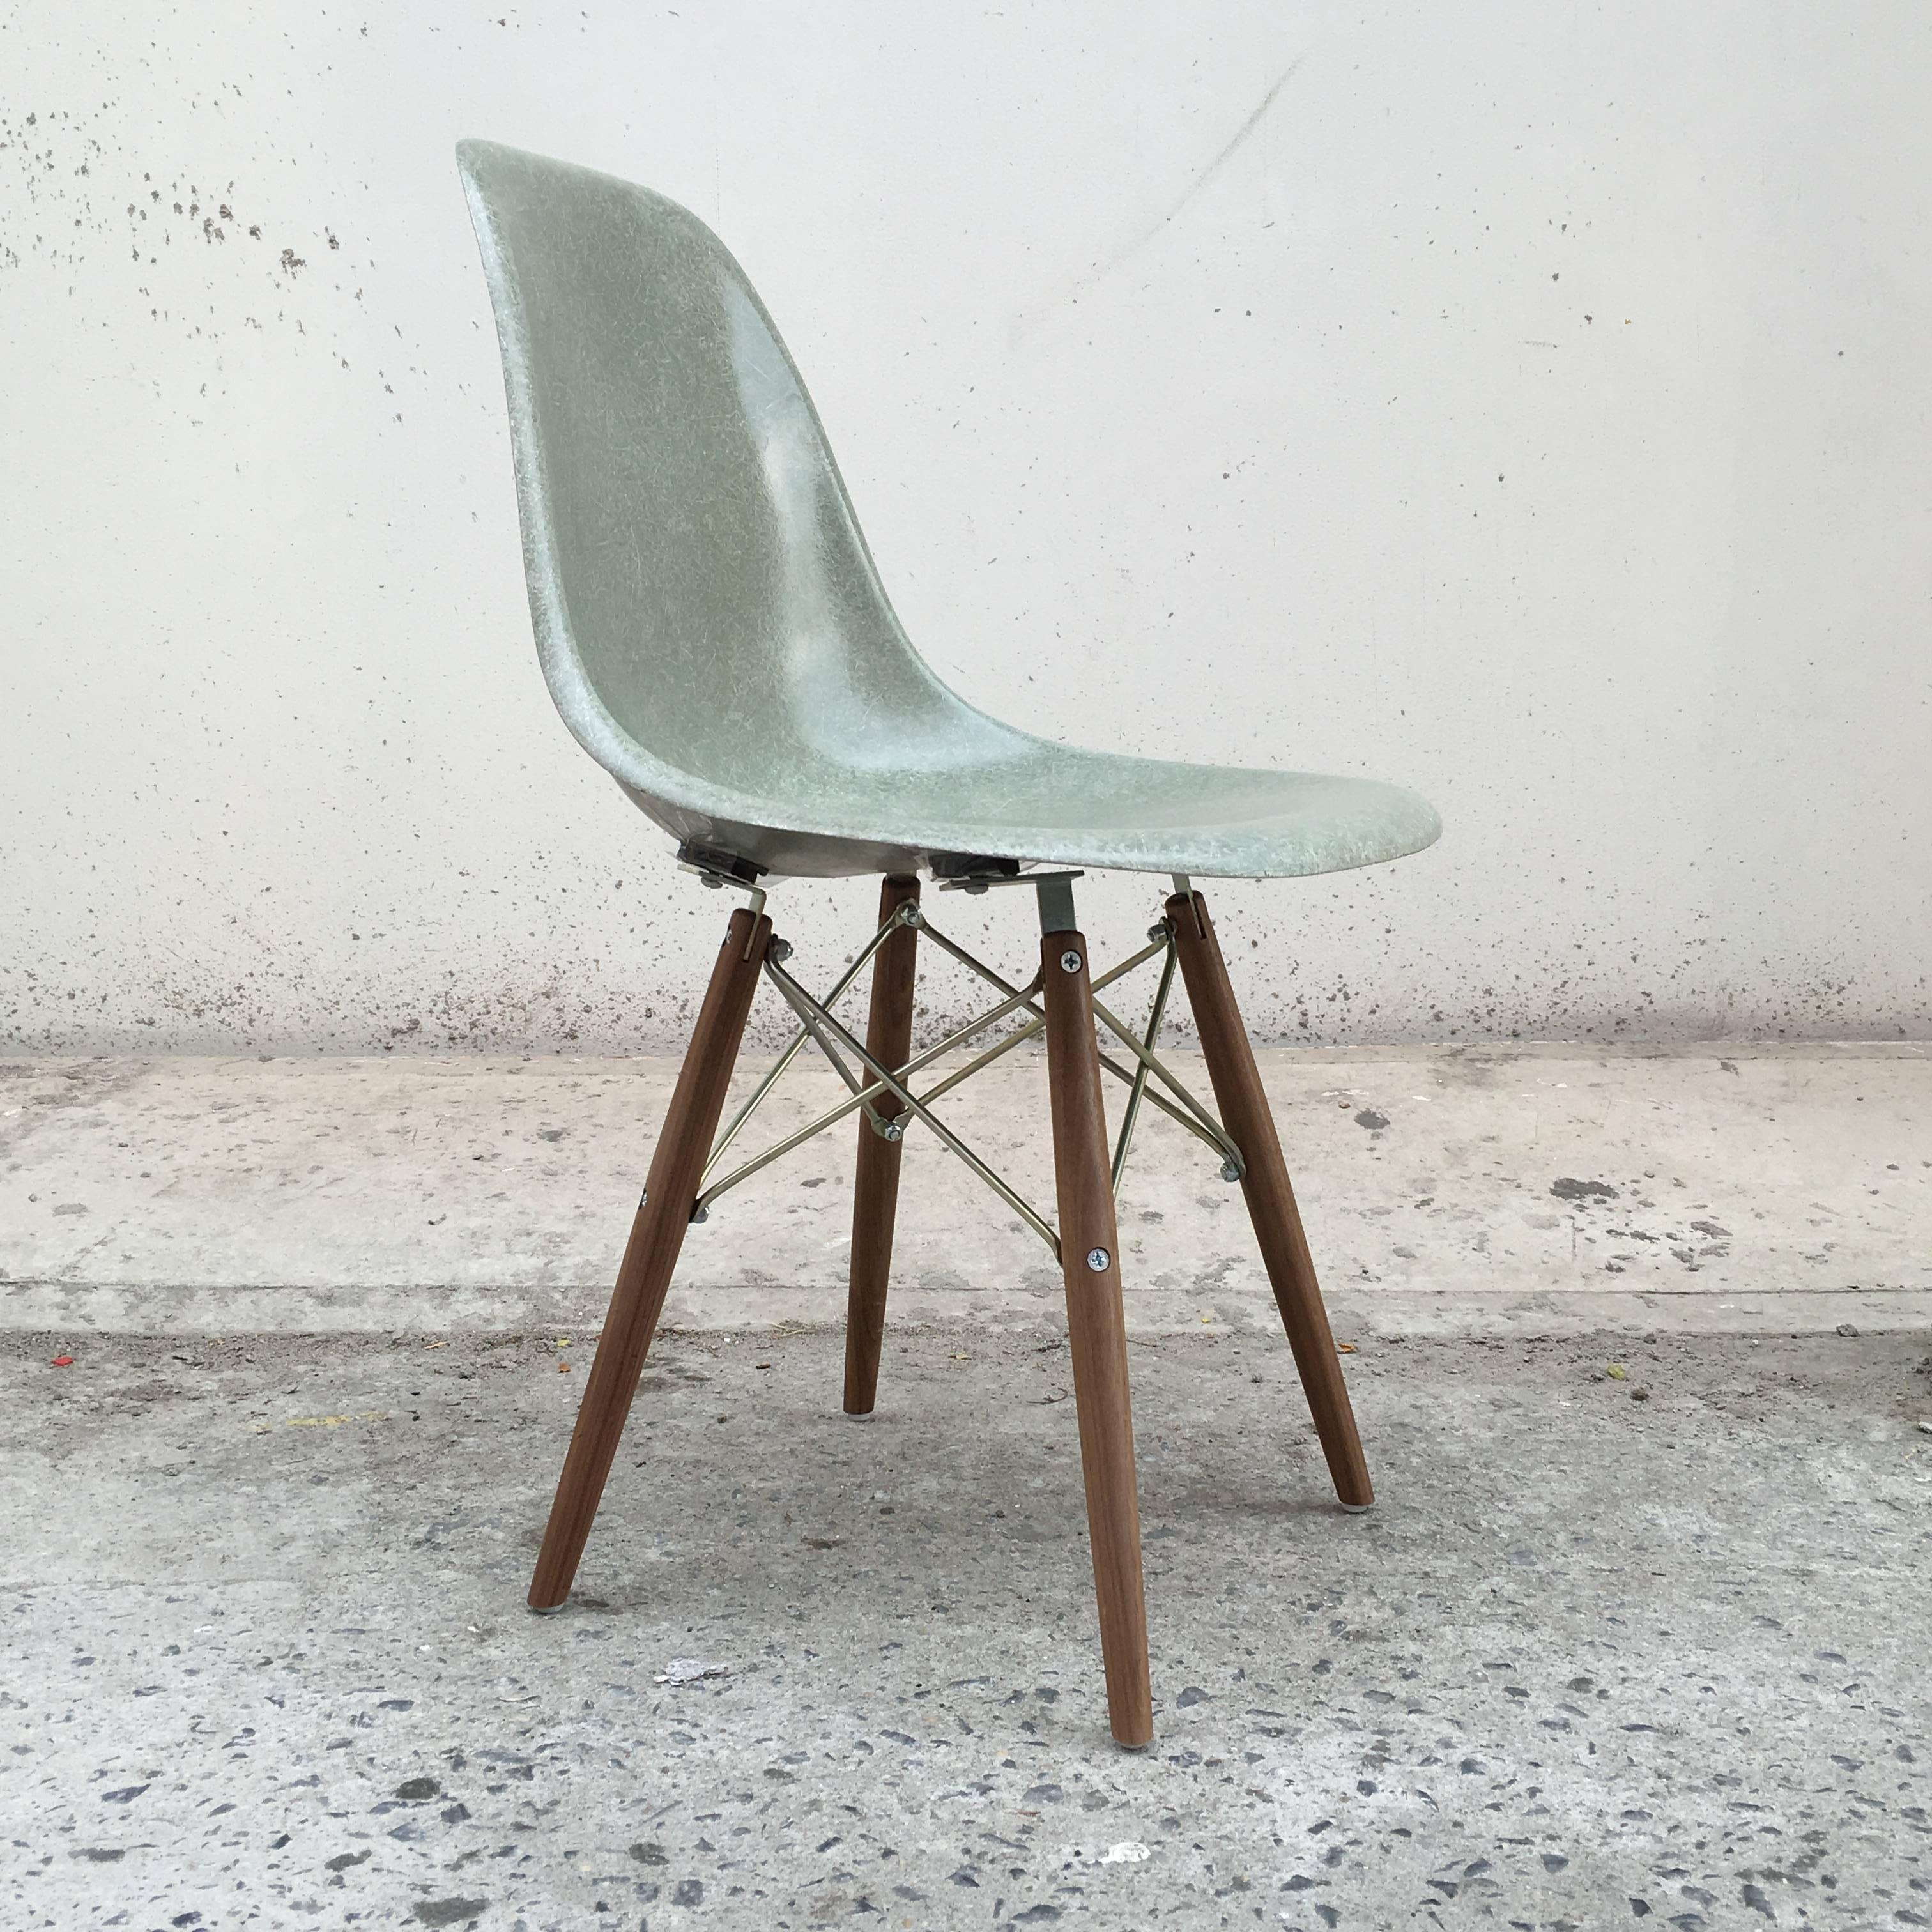 Four Herman Miller Eames dining chairs in rare seafoam green. New walnut dowel bases from Modern Conscience. Chairs have excellent color with no cracks or holes.